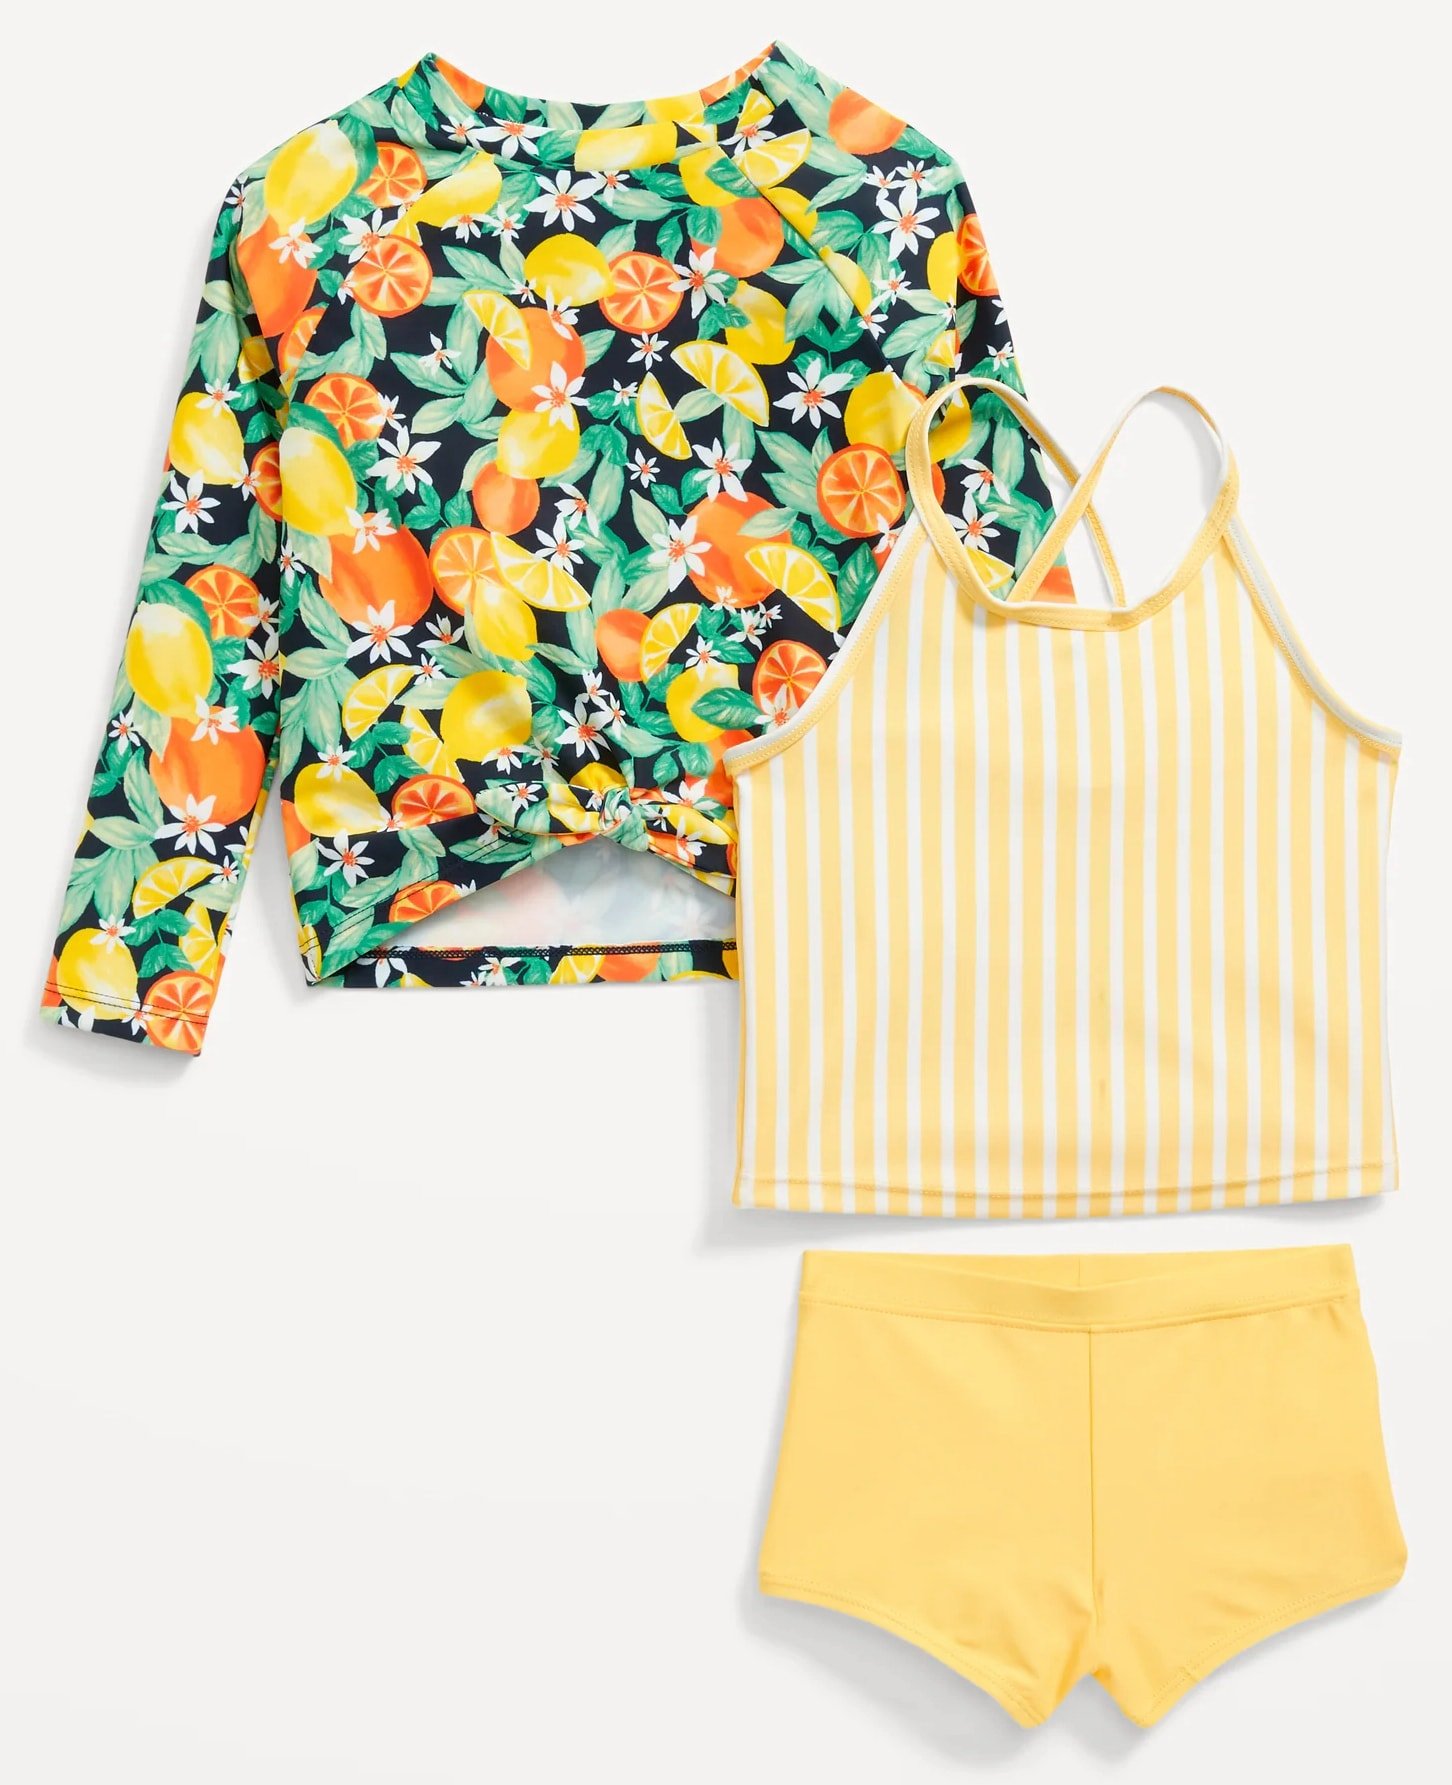 Citrus print rashguard with two-piece yellow and white stripe bathing suit 